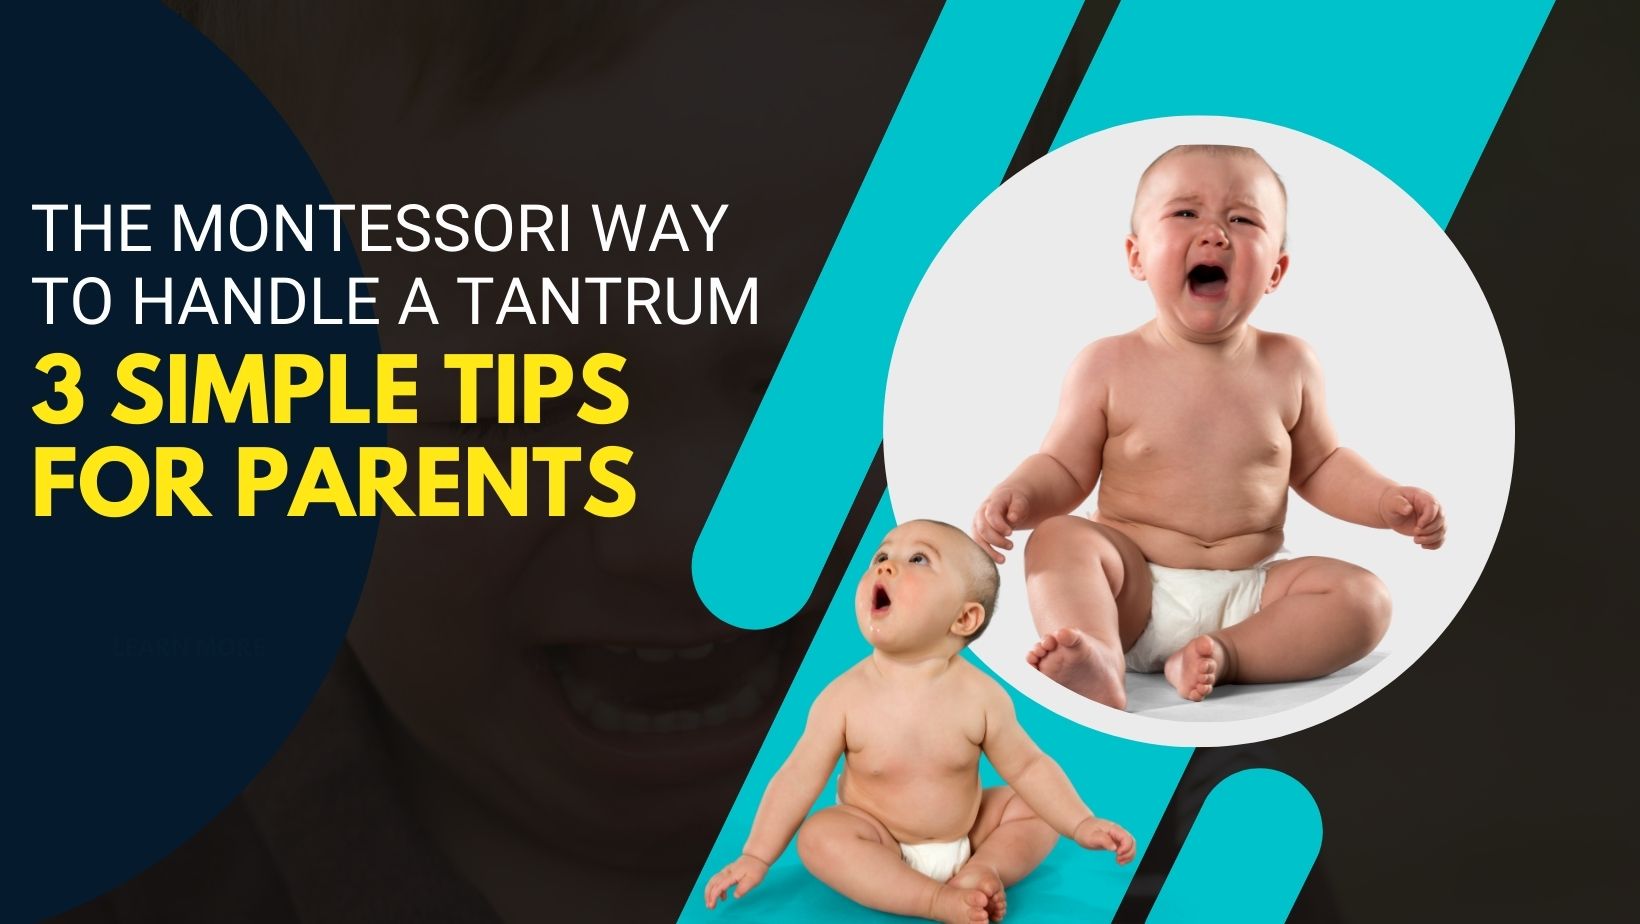 The Montessori Way To Handle a Tantrum: 3 Simple Tips for Parents